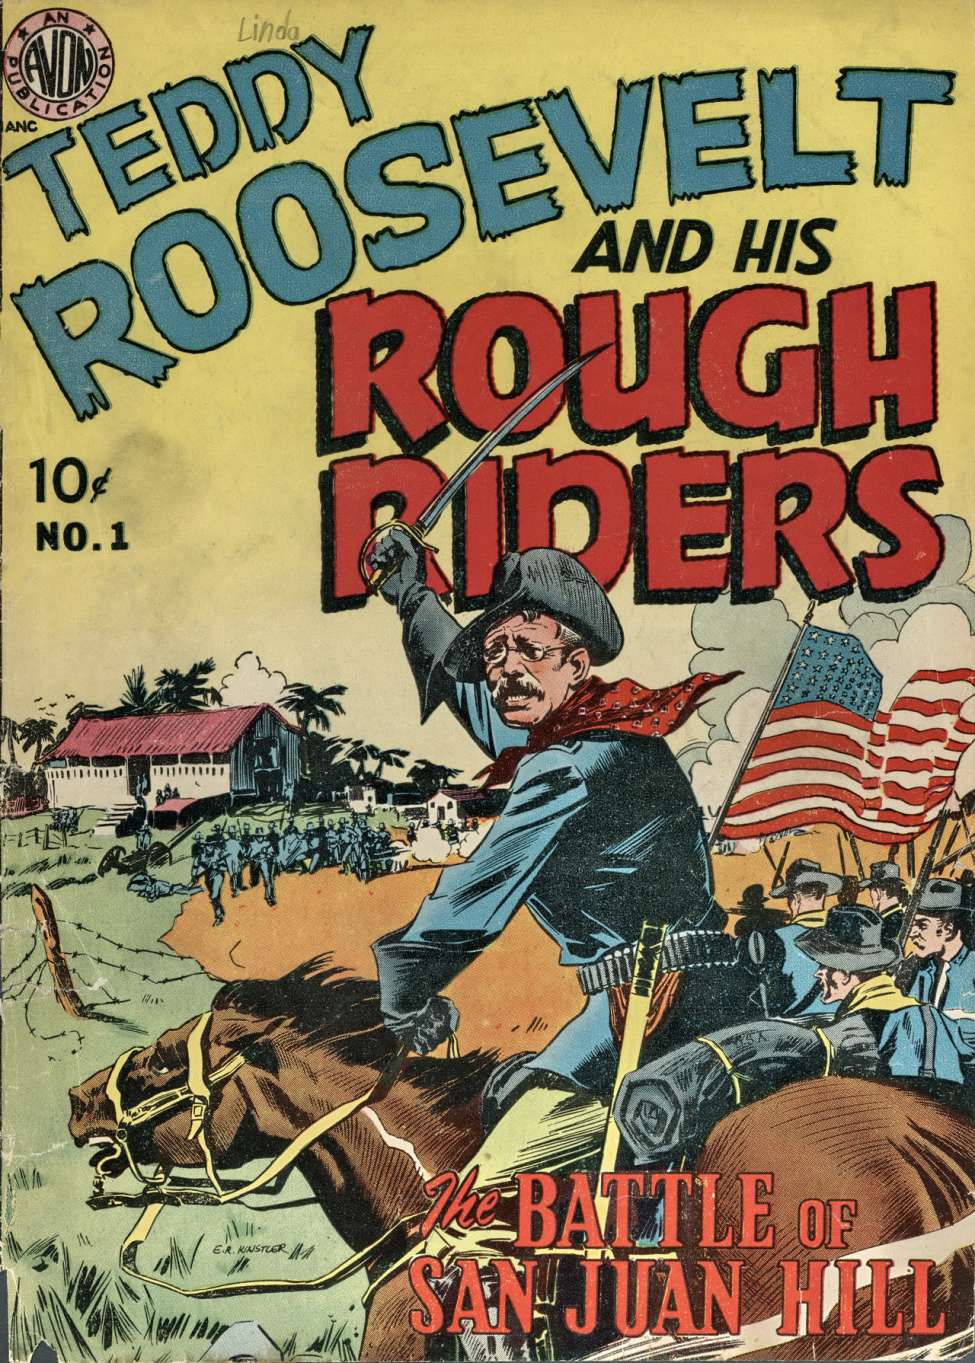 Book Cover For Teddy Roosevelt And His Rough Riders 1